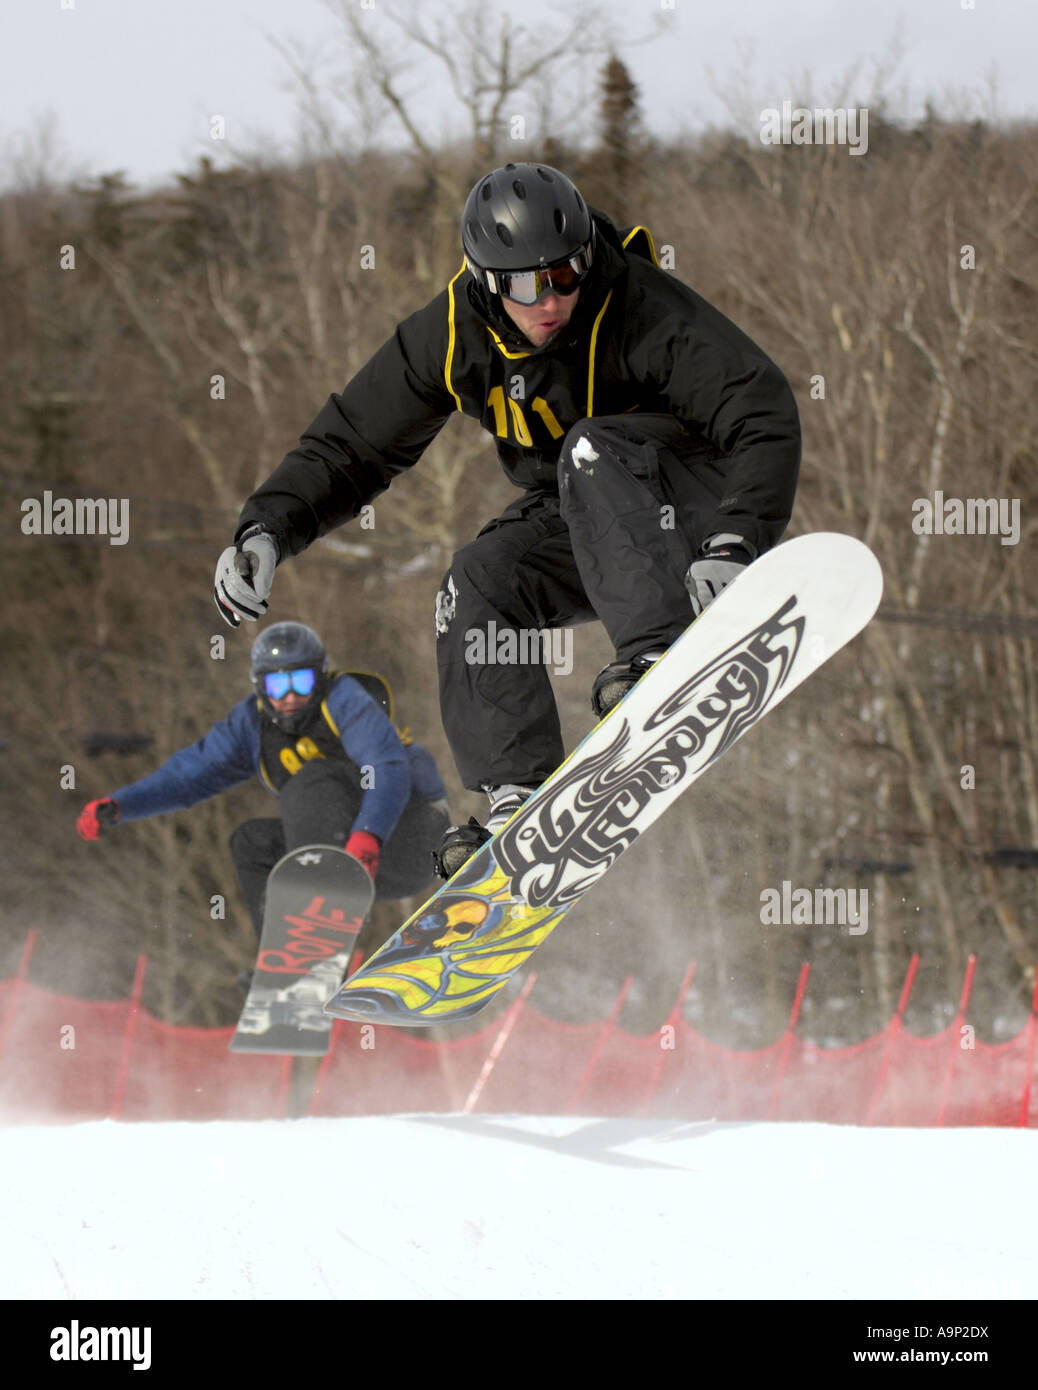 Two Snowboarders racing mid-air during a boardercross competition Stock Photo